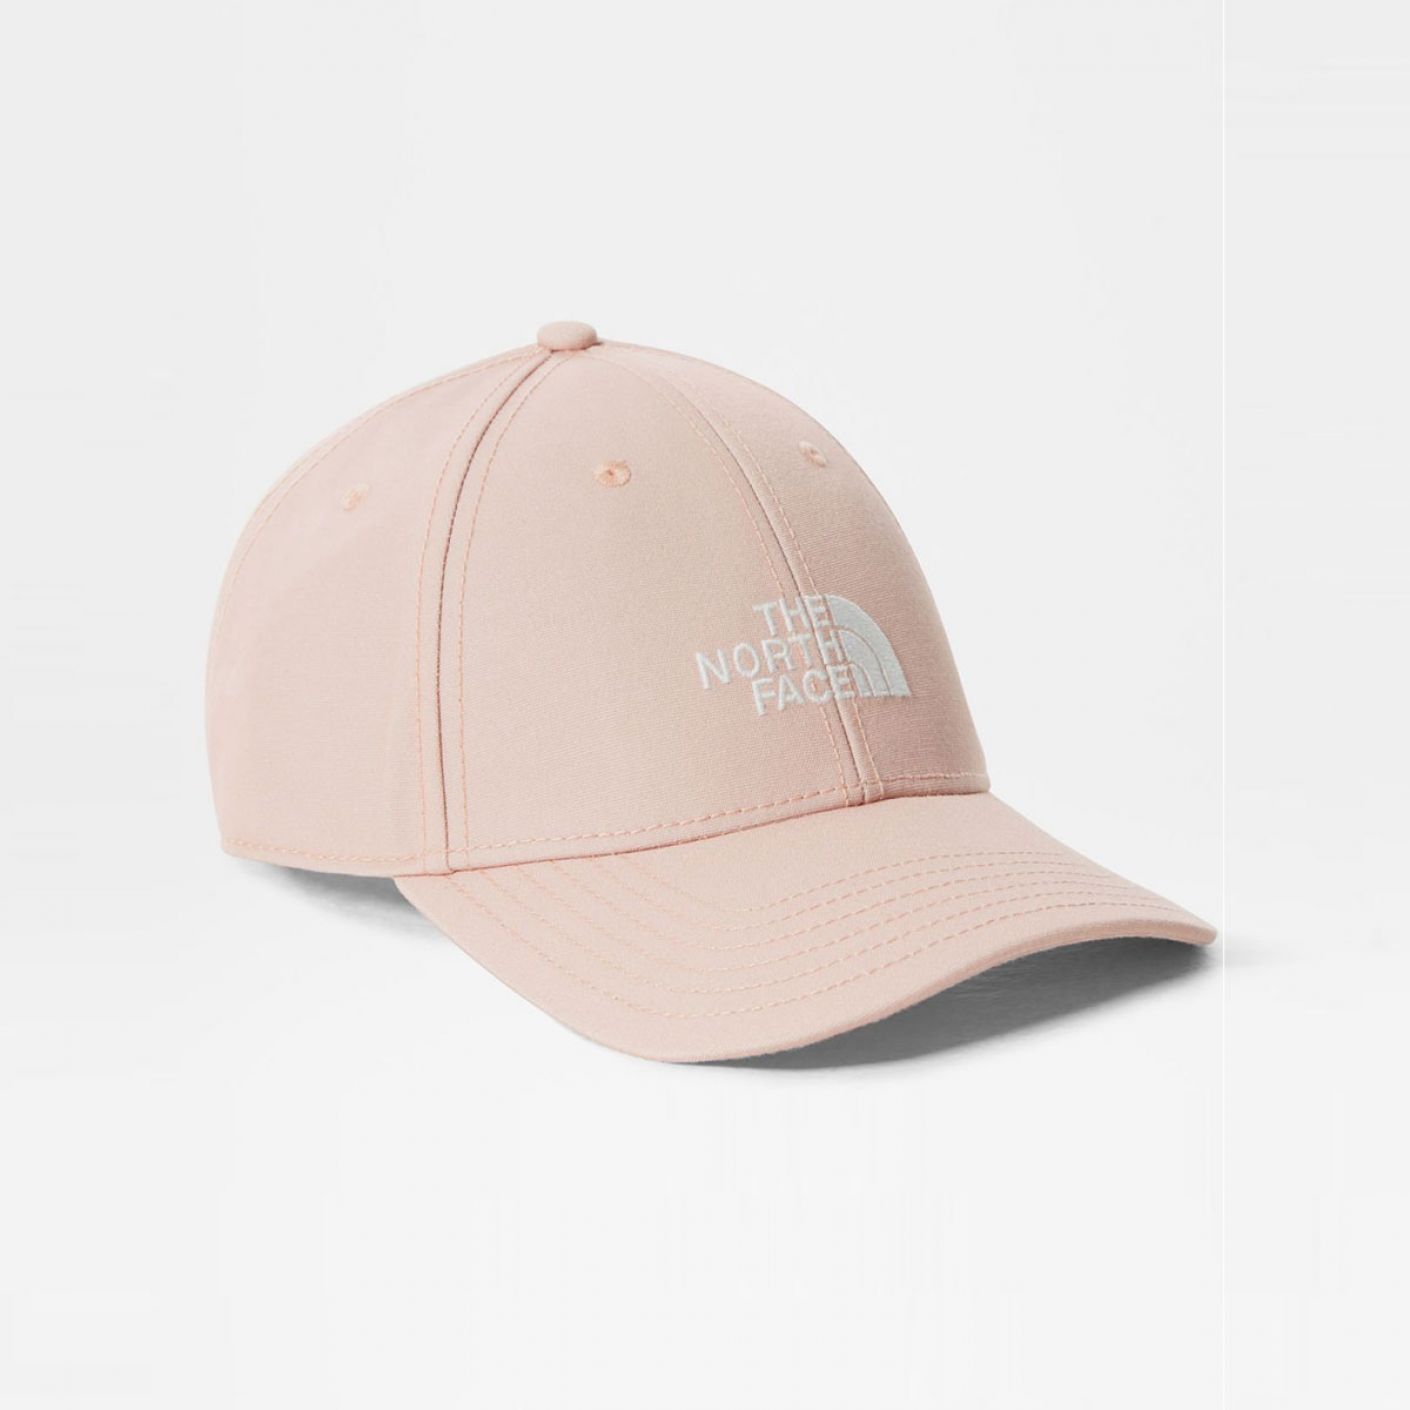 The North Face Recycled 66 Classic Hat Evening Sand Pink